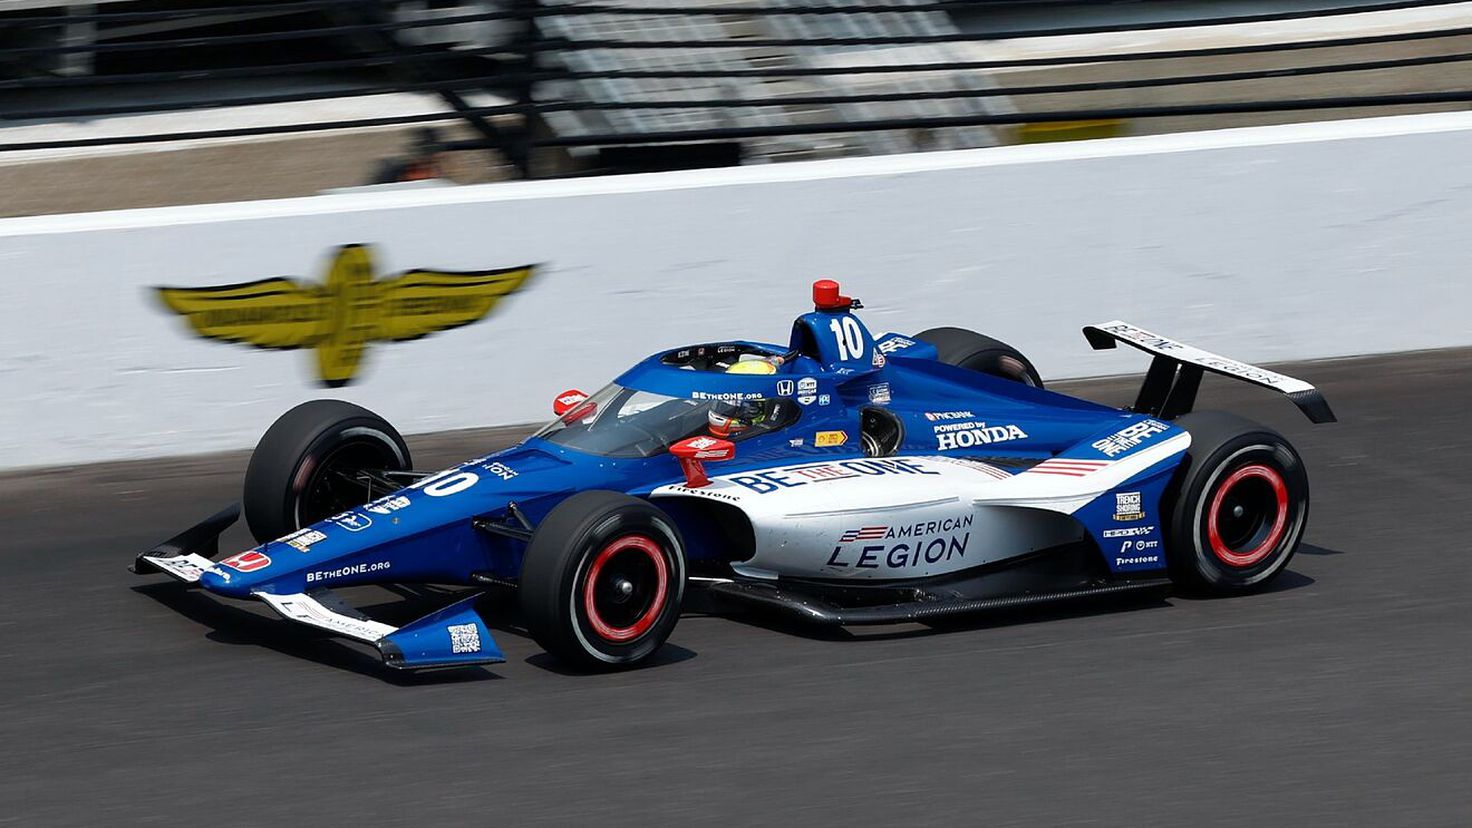 Palou will fight for the Indianapolis 500 pole
